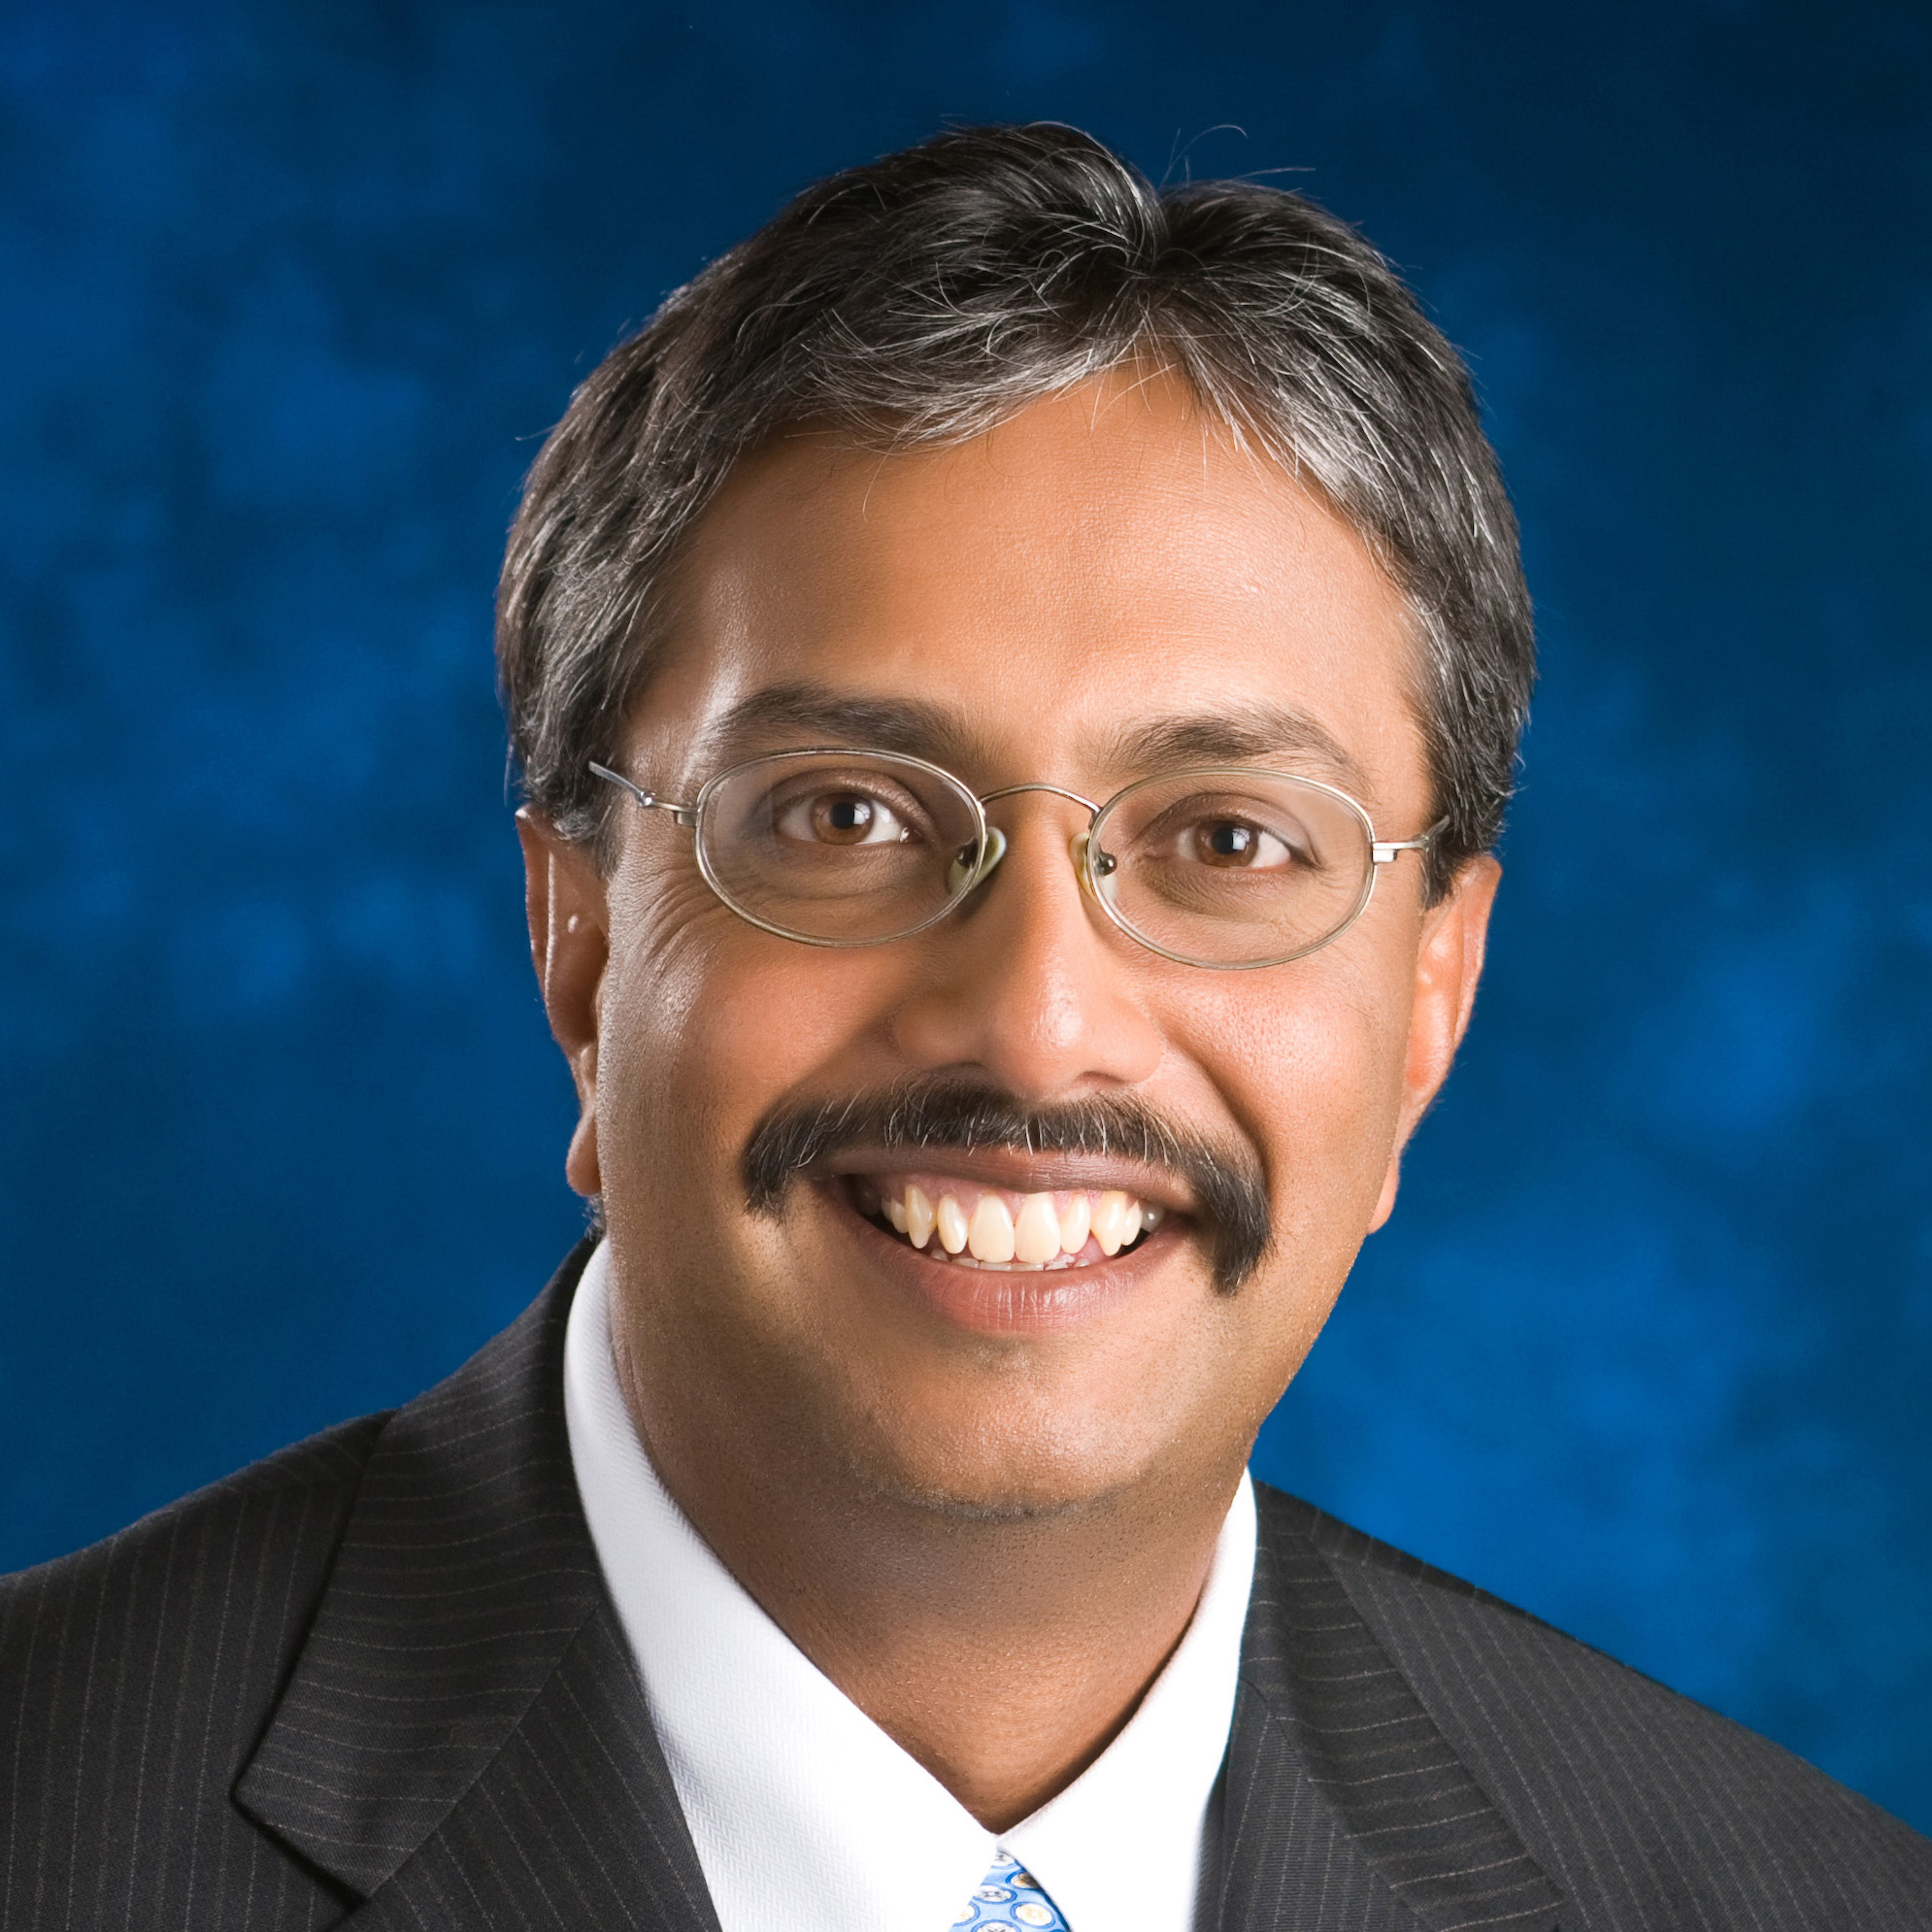 Vice President, ExxonMobil Research and Engineering Company
Vijay Swarup has held the role of vice president of research and development at ExxonMobil since 2014. He leads a team of scientists and engineers to develop technologies that can support the demand for global energy while transitioning to a lower carbon future. A 30-year veteran of ExxonMobil, Swarup has held a variety of leadership roles in engineering, chemicals, and planning from offices in Alberta, Canada, to Baytown, Texas. He has a Ph.D. in chemical engineering from Rutgers University and serves on the National Academies Board on Chemical Sciences Technology, and the advisory boards for the MIT Energy Initiative and the Singapore Energy Center.